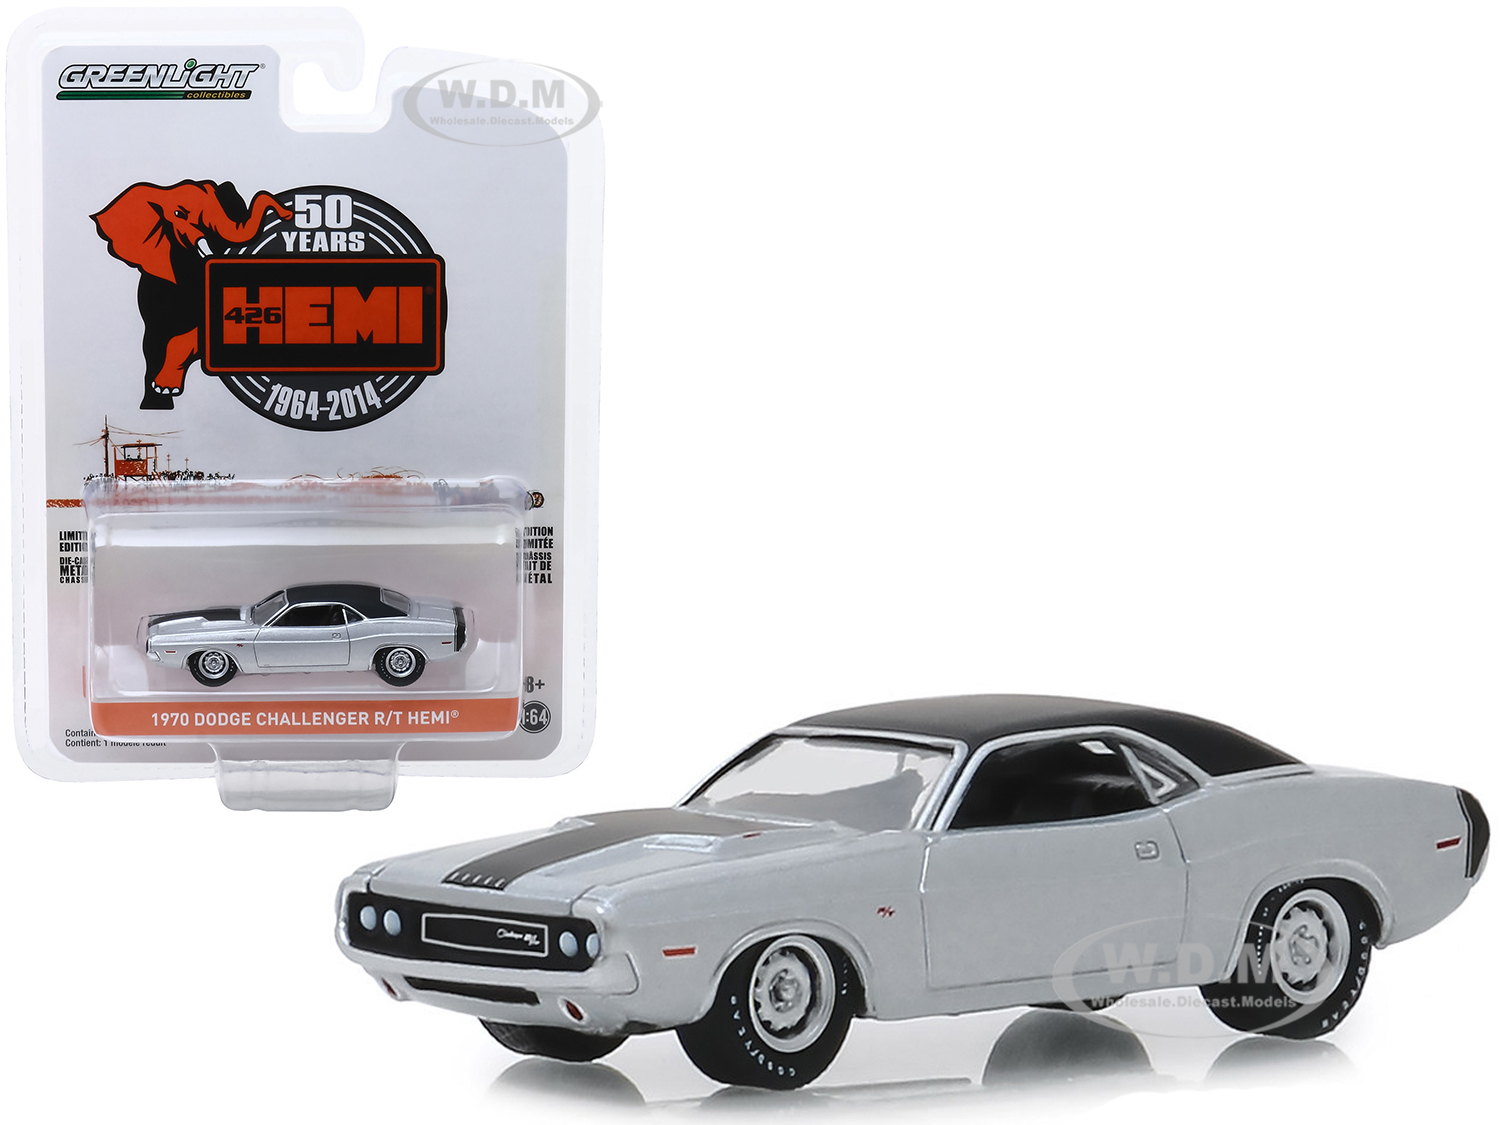 1970 Dodge Challenger R/t Hemi Silver With Black Top And Black Stripes "426 Hemi 50 Years" (1964-2014) "anniversary Collection" Series 9 1/64 Diecast